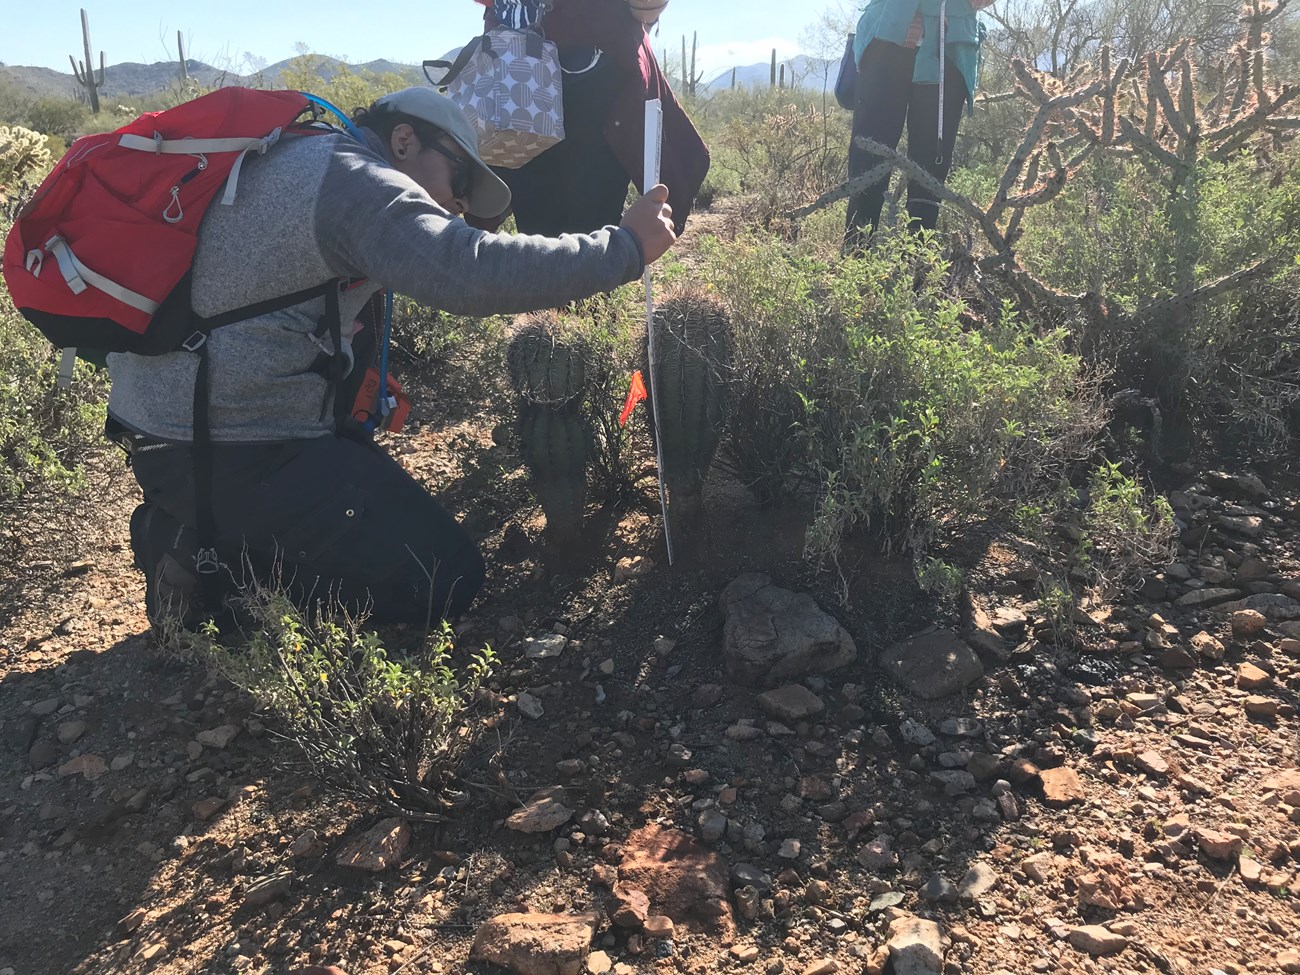 Park staff kneeling to measure the height of two short saguaros next to each other.